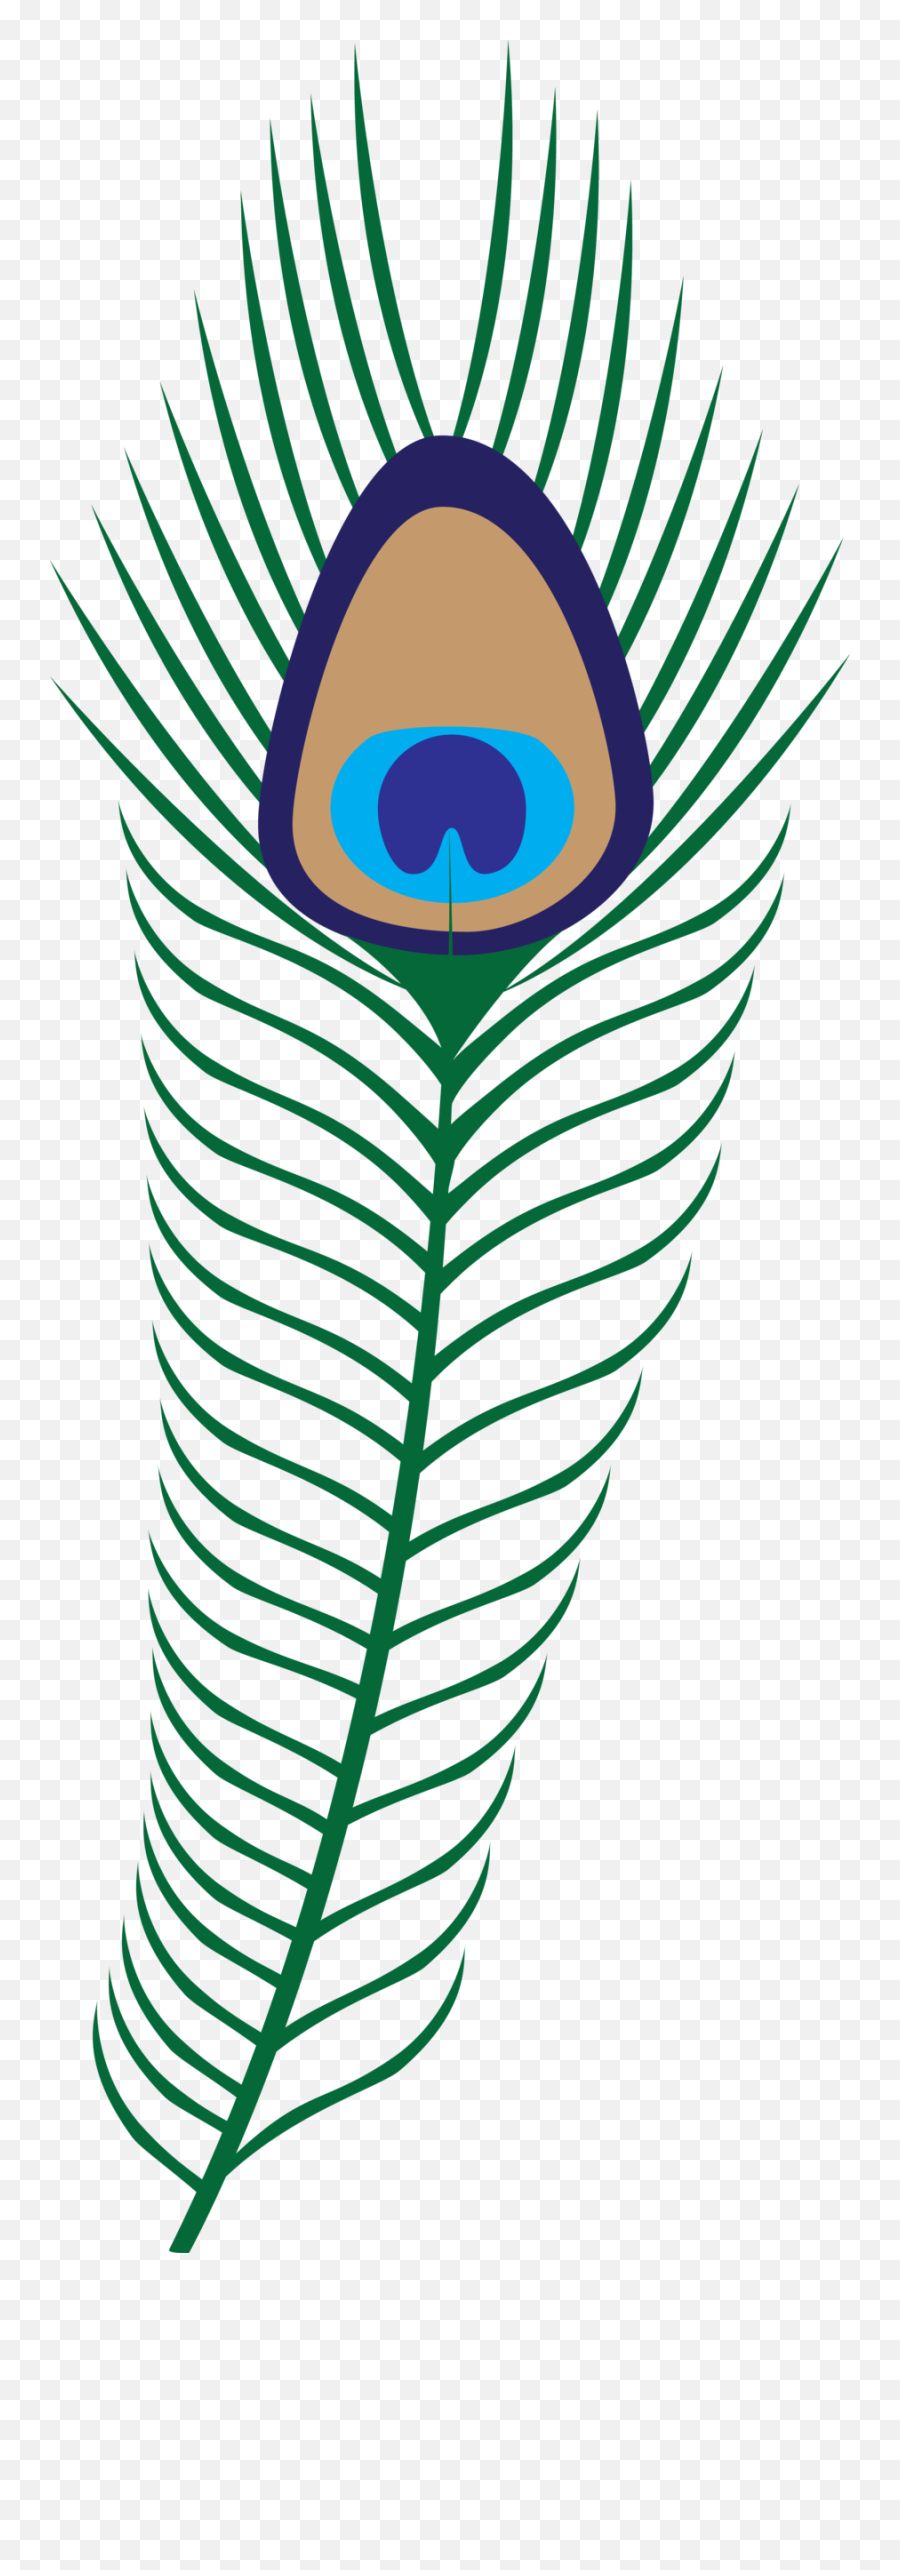 Flute Clipart Mor Pankh - Peacock Hera Symbol Greek Mythology Png,Peacock Feathers Png